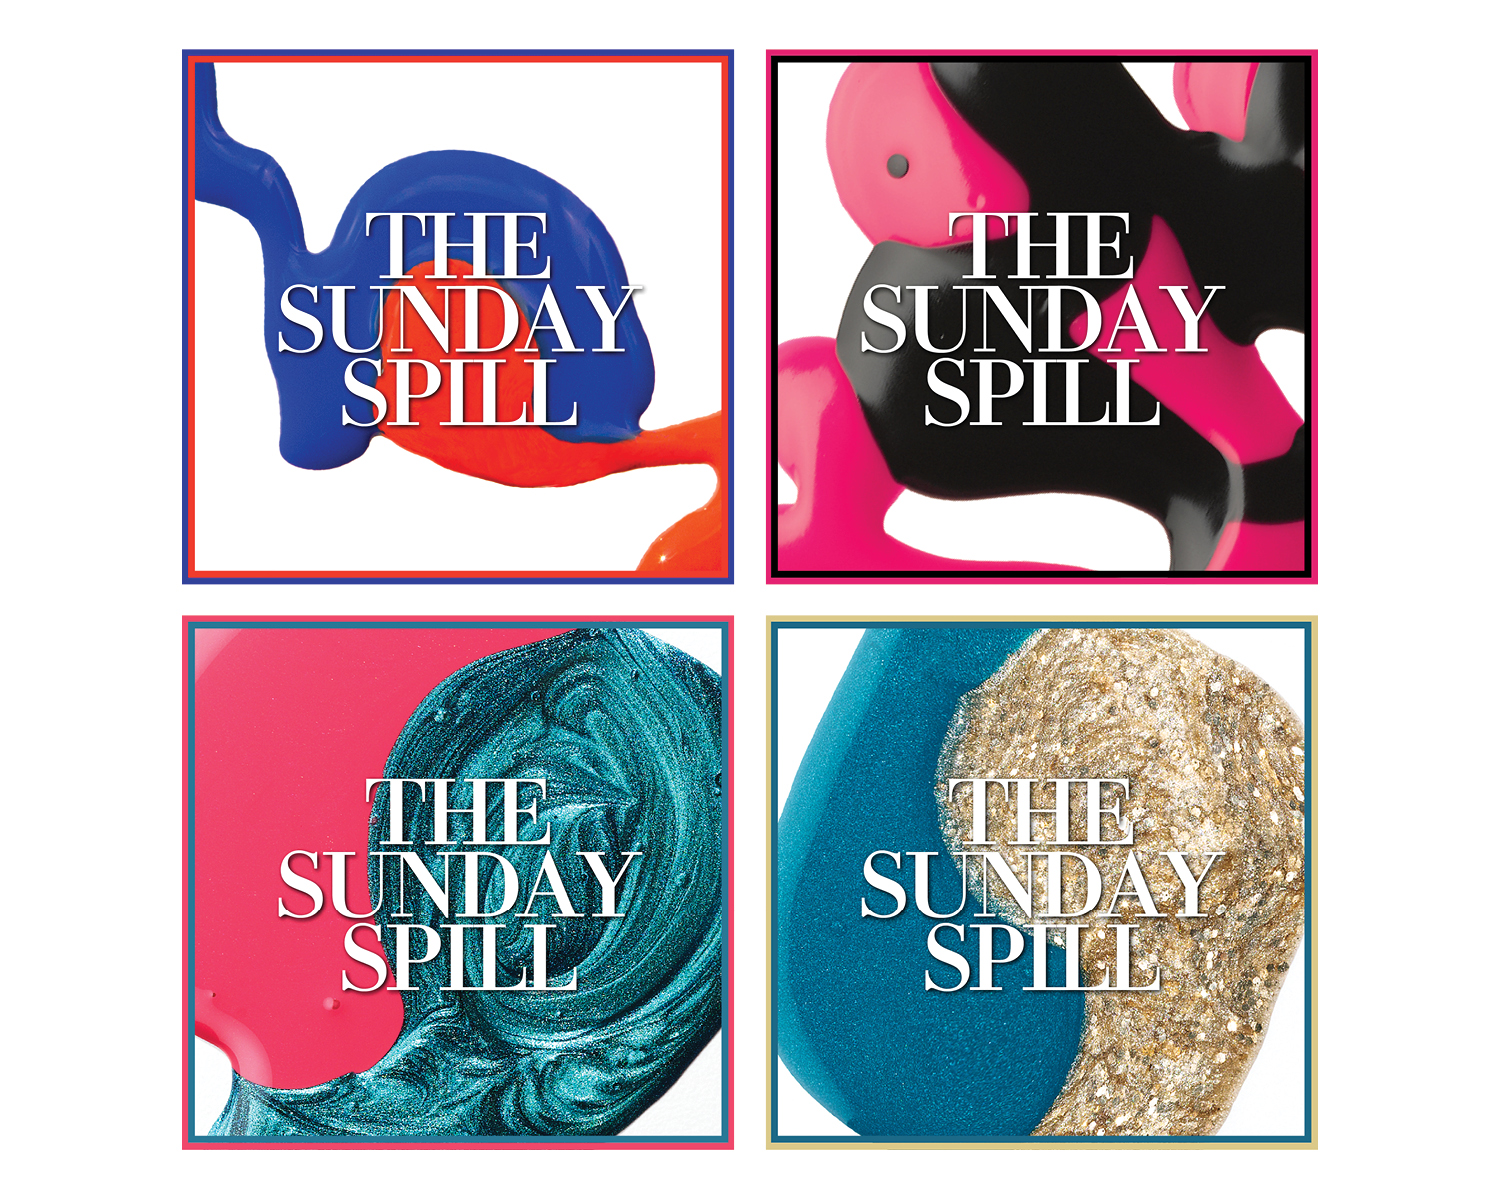  The Sunday Spill  (New feature name, layout, and photographic direction)   2013   VOGUE.COM  